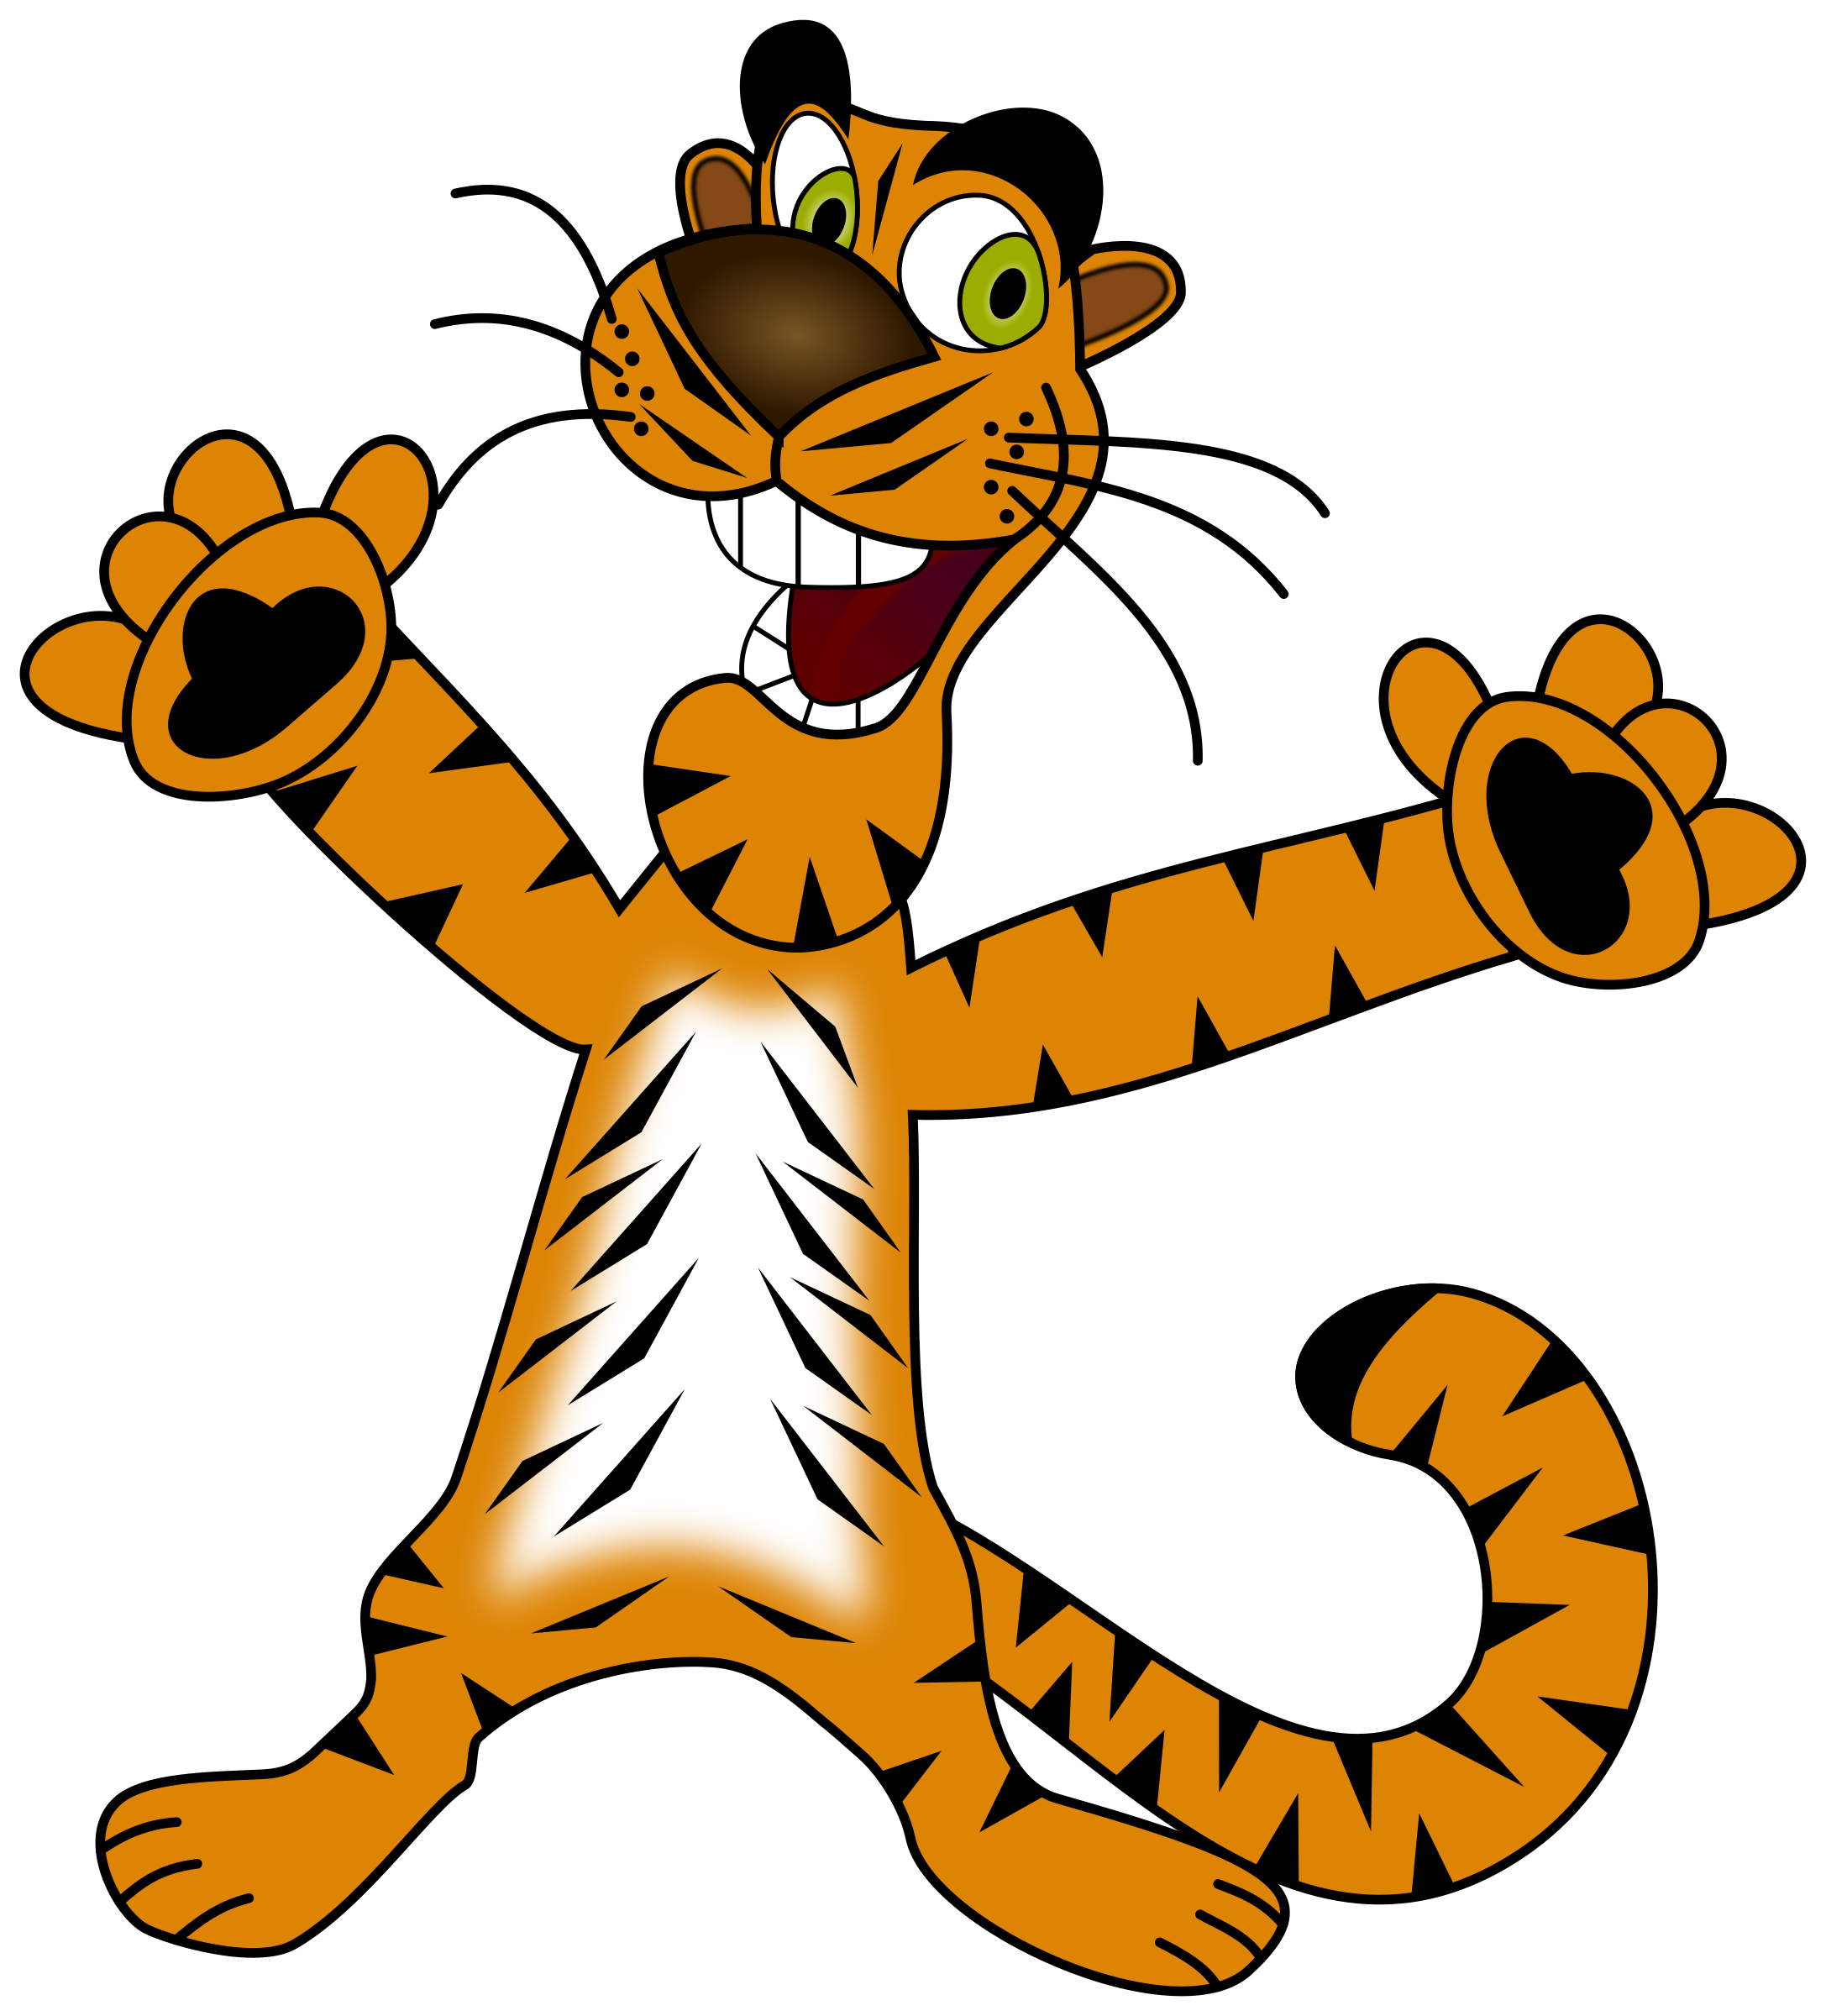 Tiger funny pencil and. Ivy clipart simple